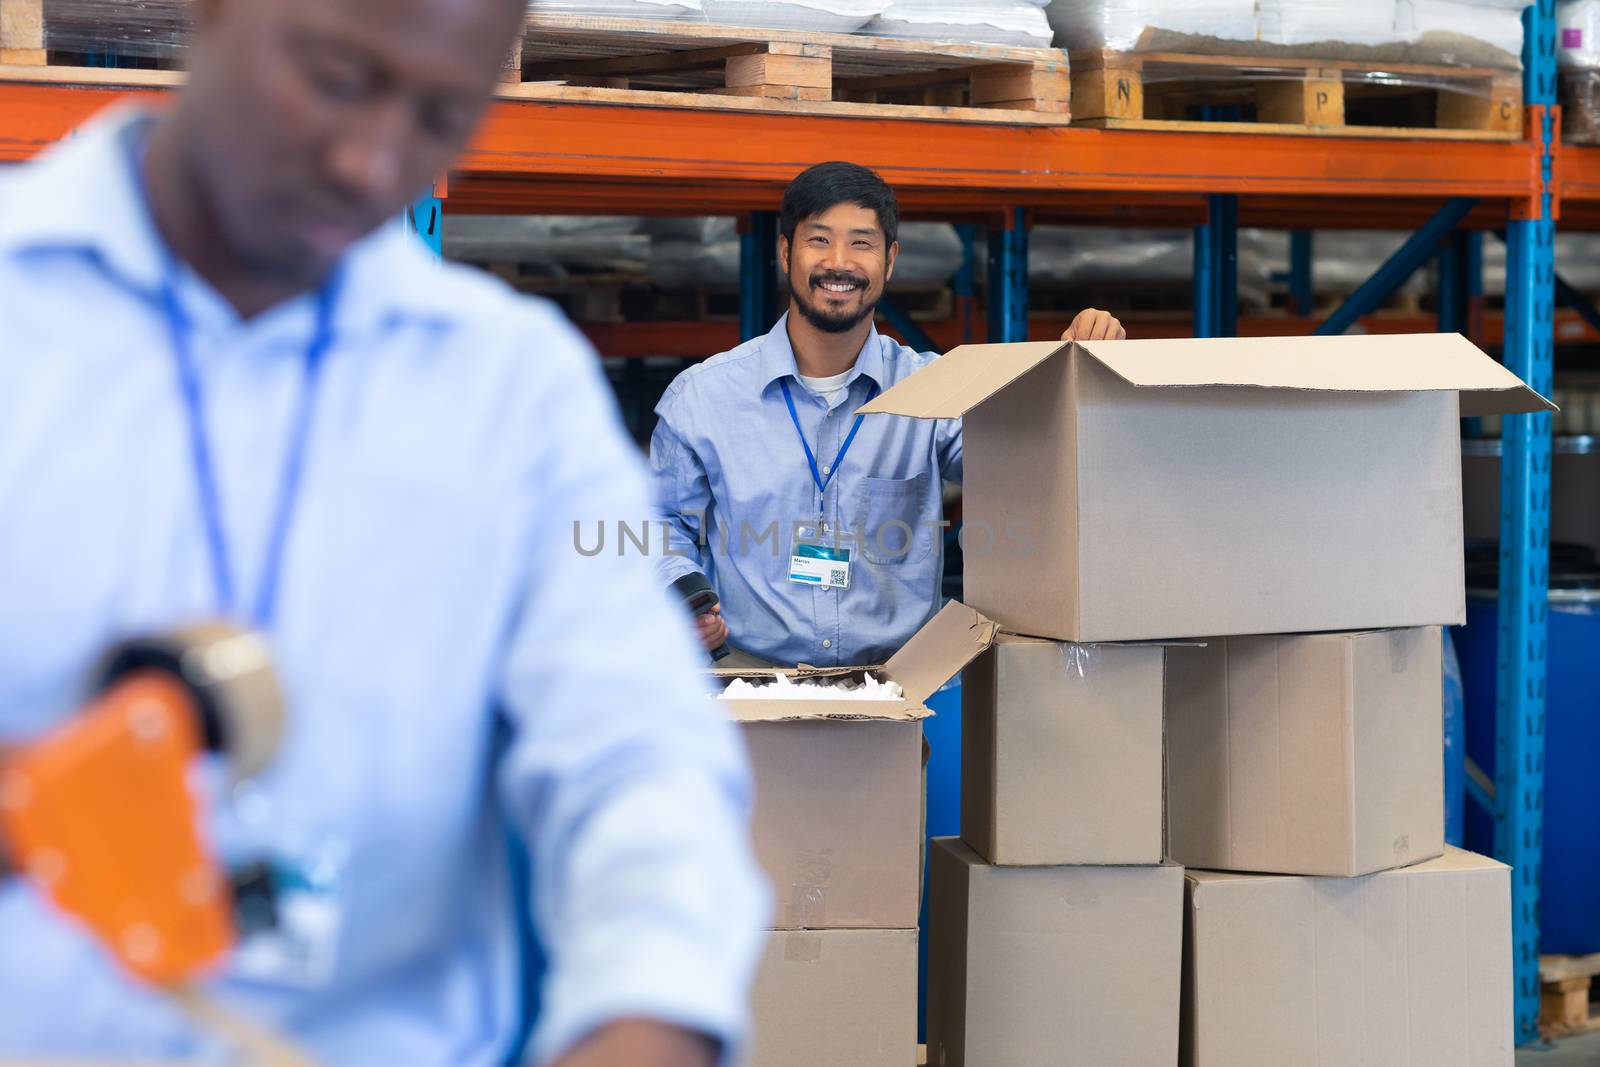 Male staff looking at camera while checking stock in warehouse by Wavebreakmedia